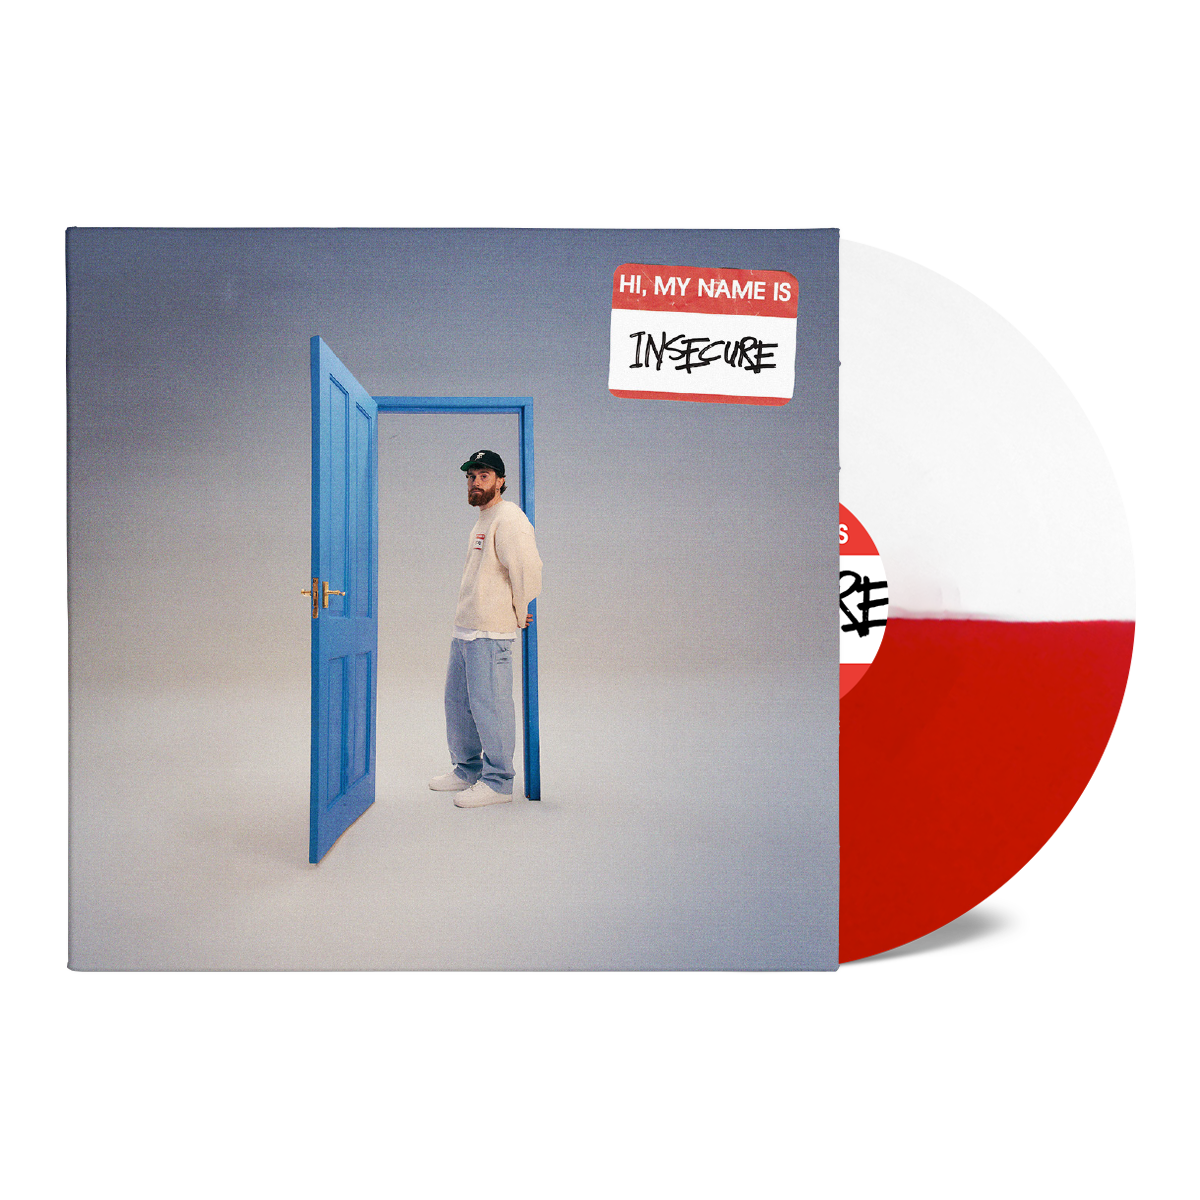 hi, my name is insecure - Blue Vinyl, Red/White Vinyl & Signed Art Card